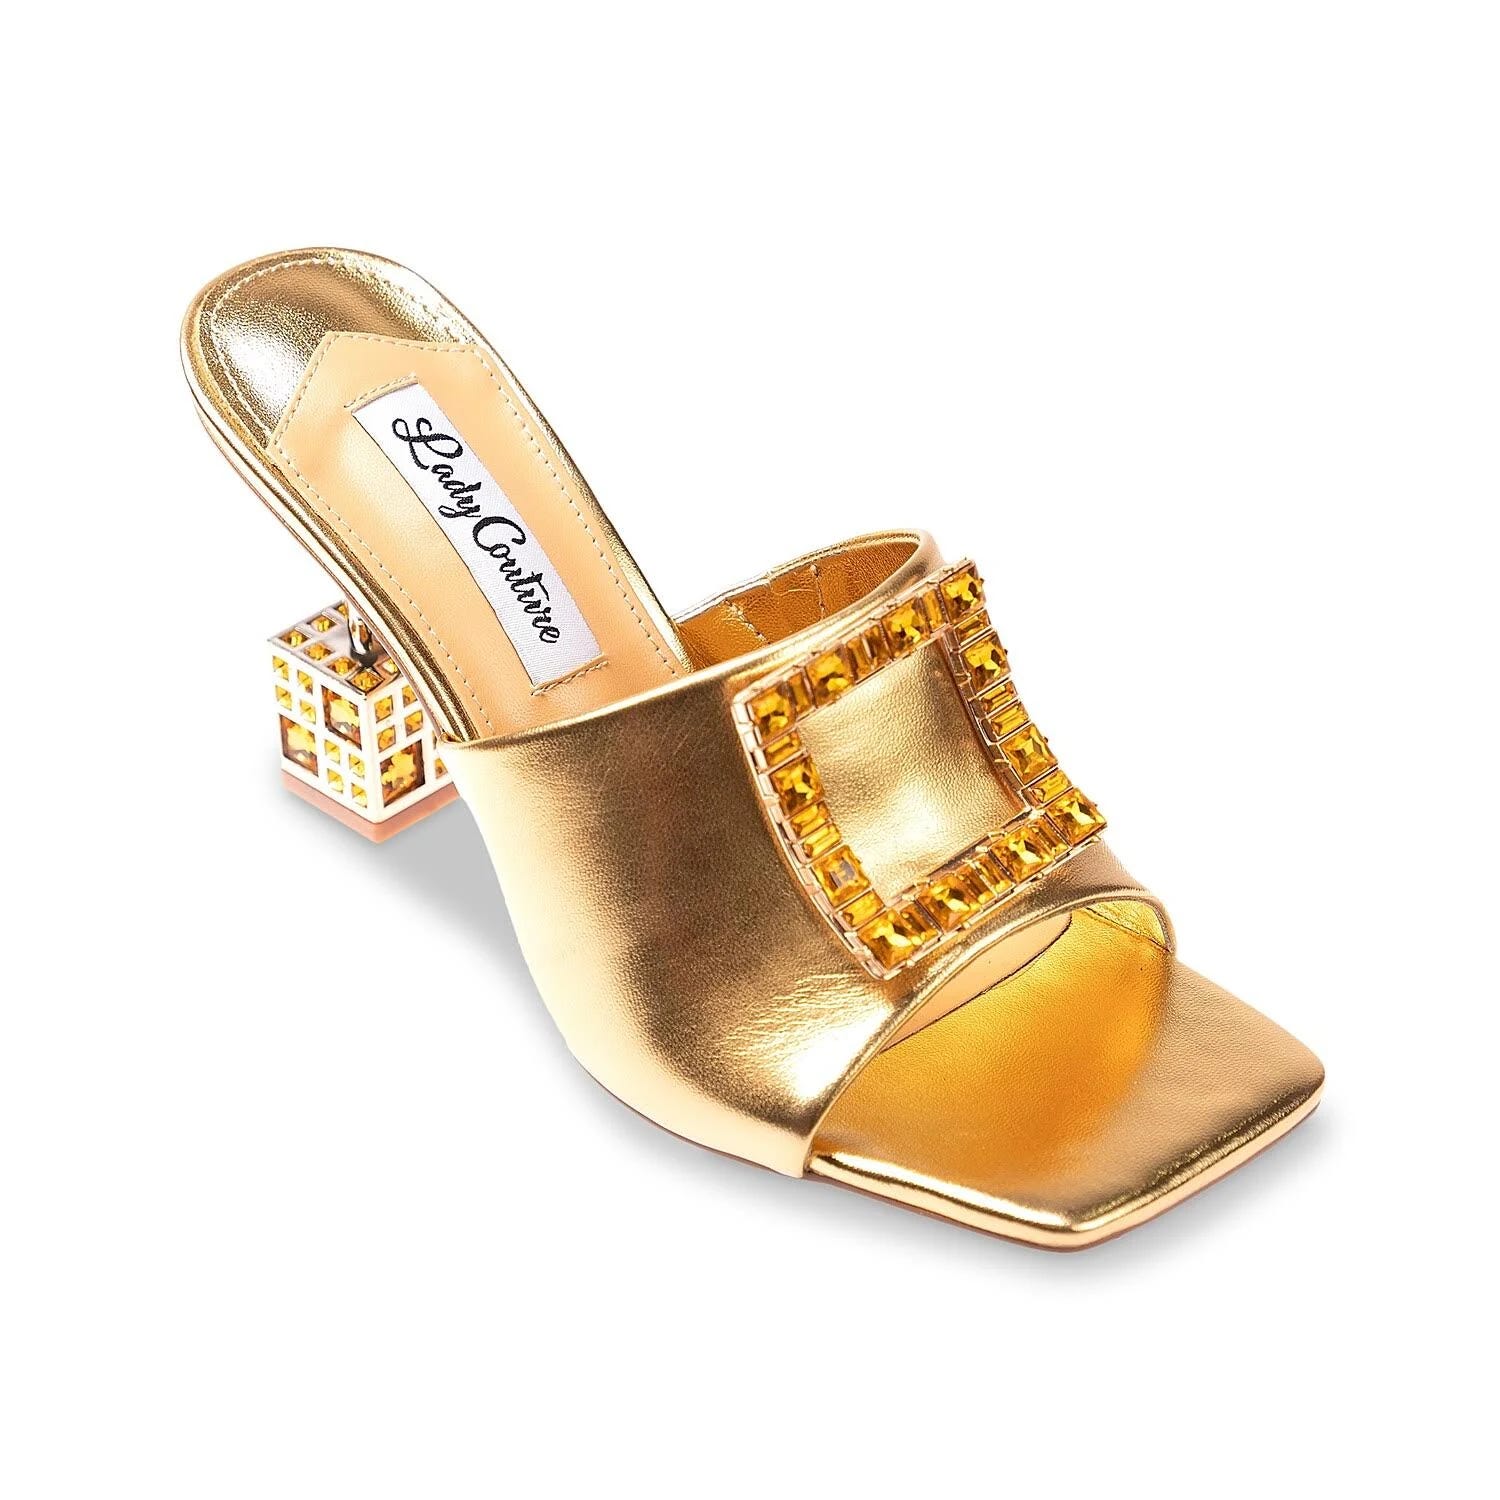 Lady Couture Metallic Sparkle Square Heel Sandals: The Perfect Fusion of Style and Comfort | Image